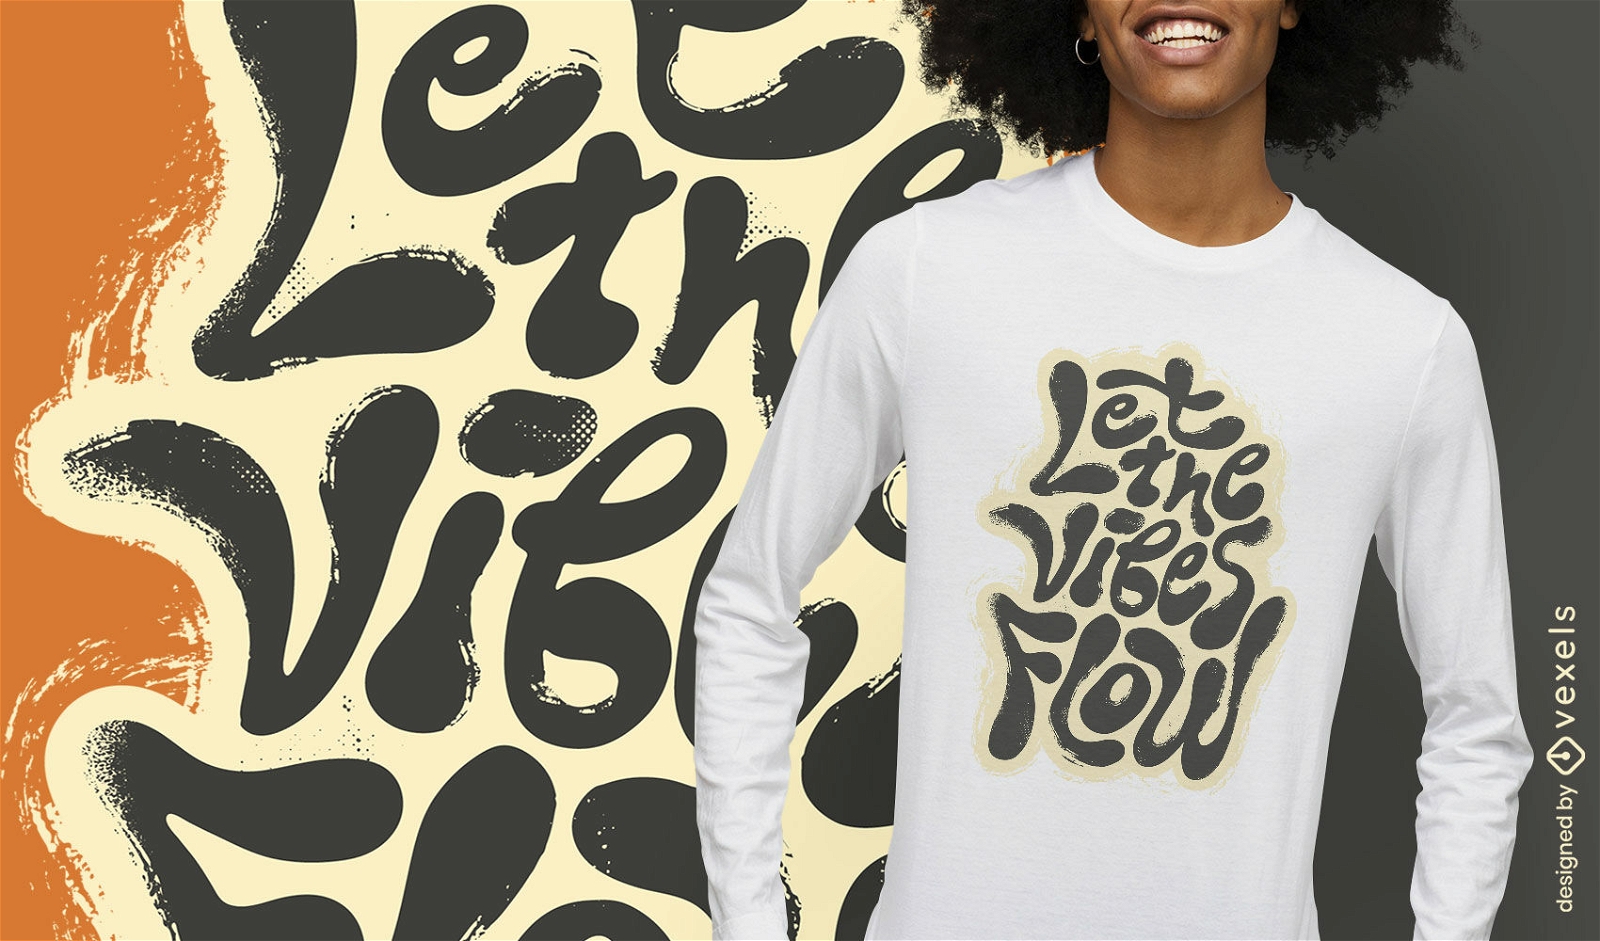 Let the vibes flow quote t-shirt design